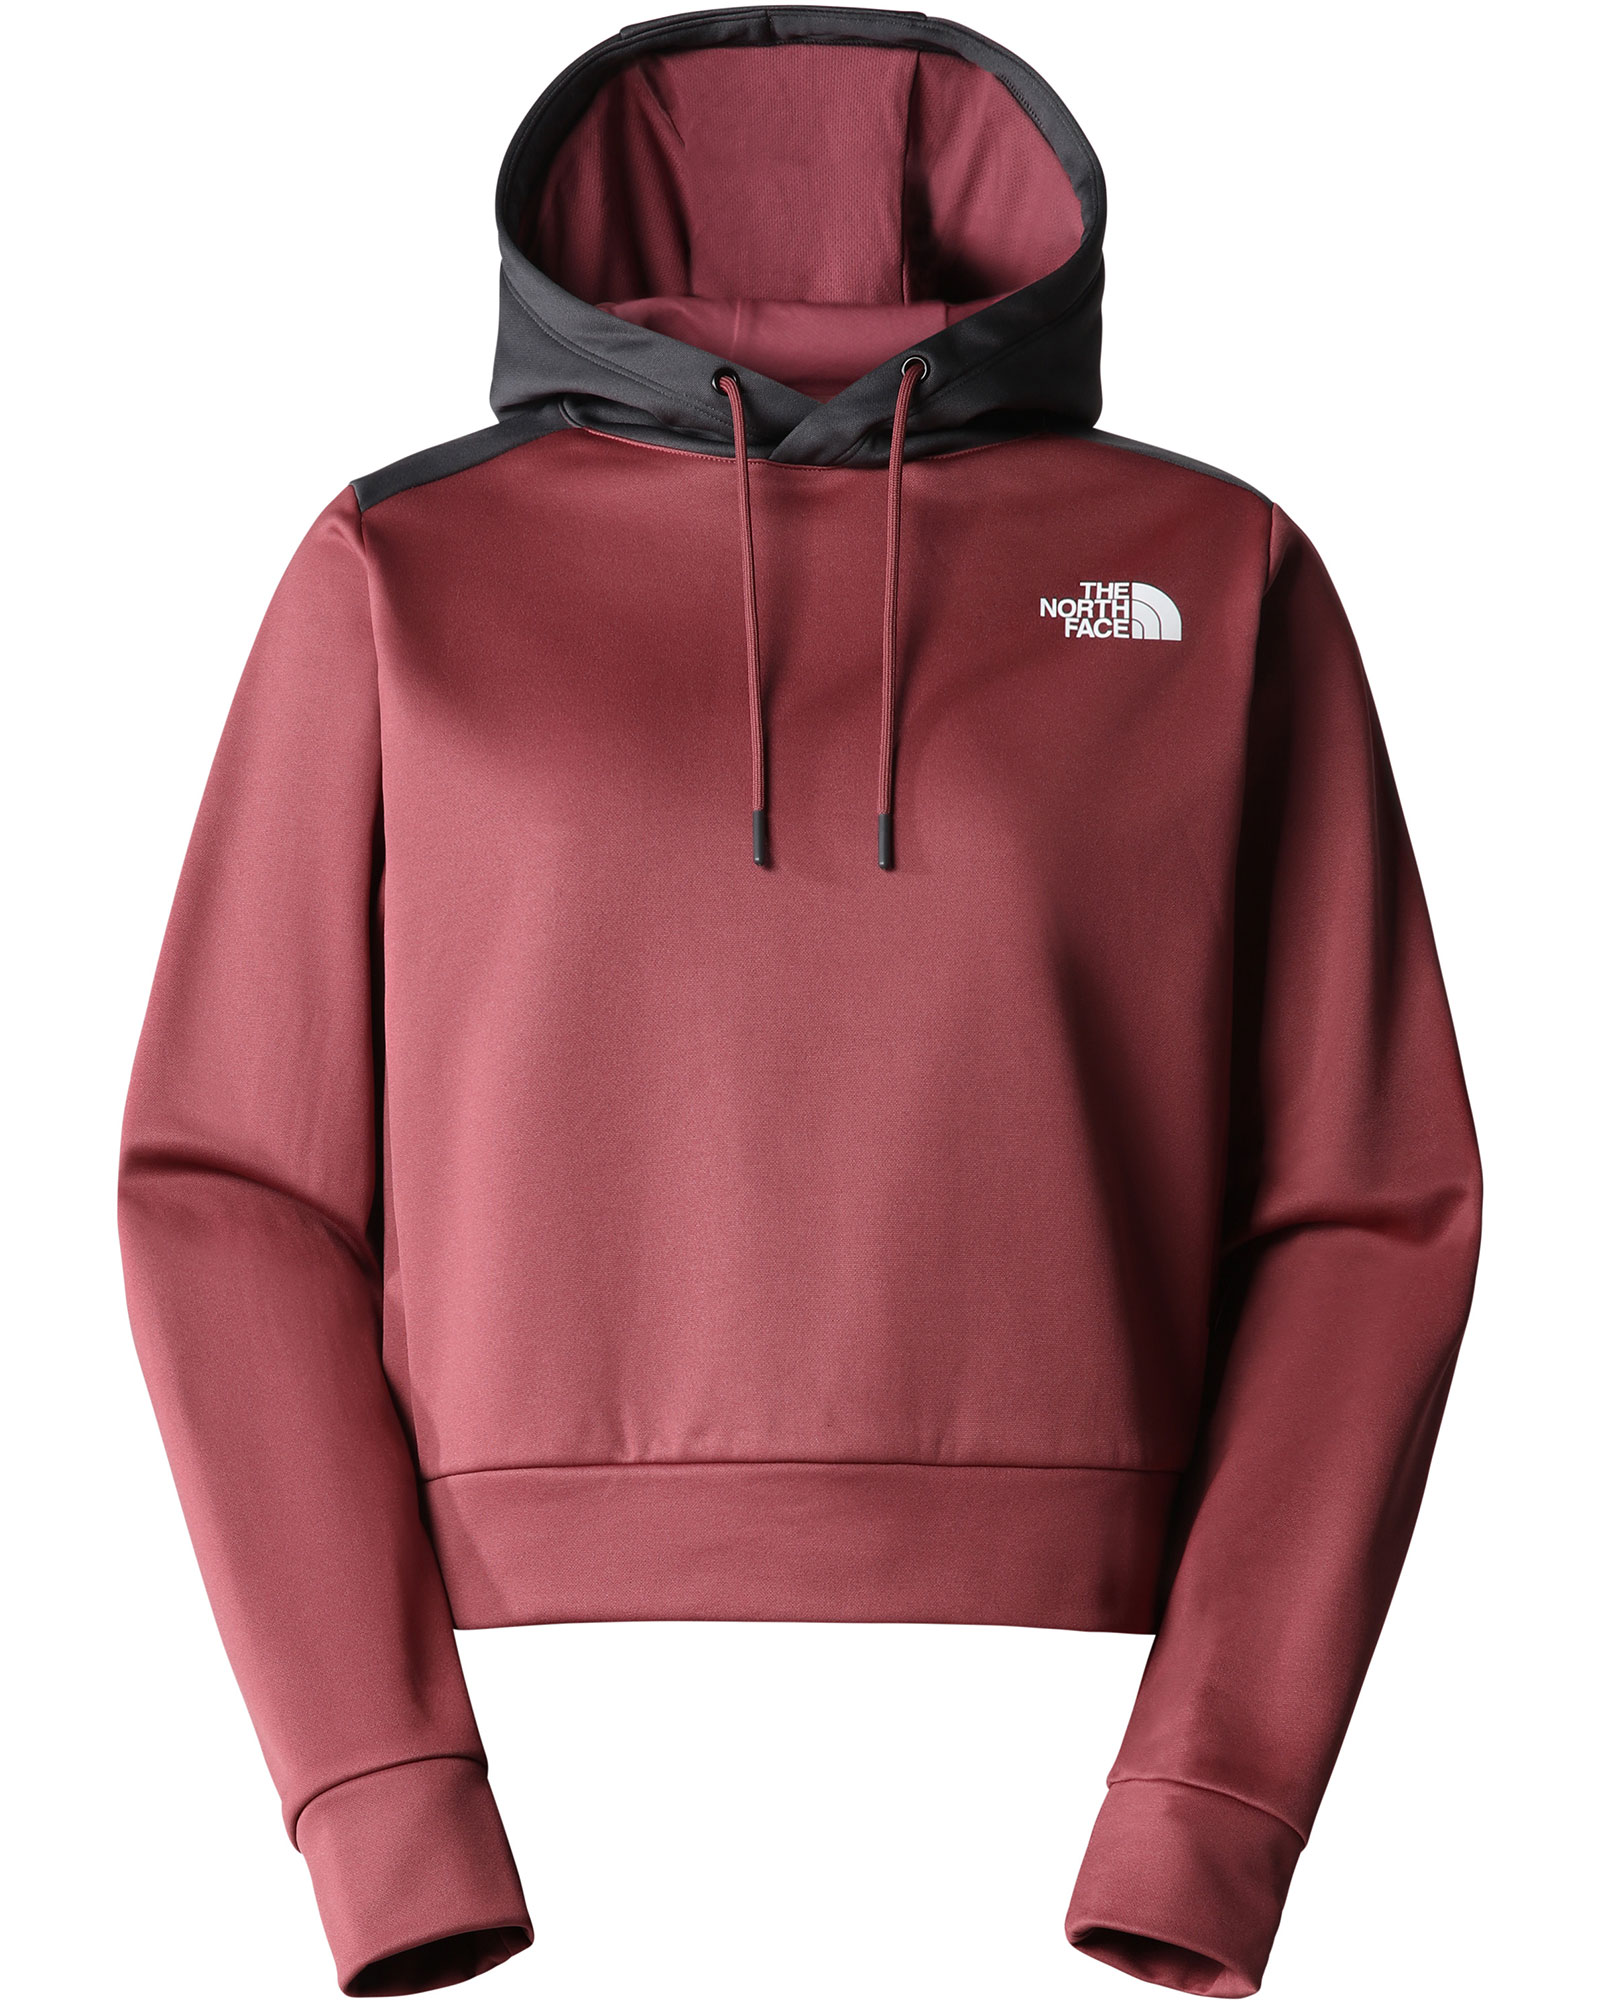 The North Face Reaxion Women’s Fleece Pullover Hoodie - Wild Ginger M